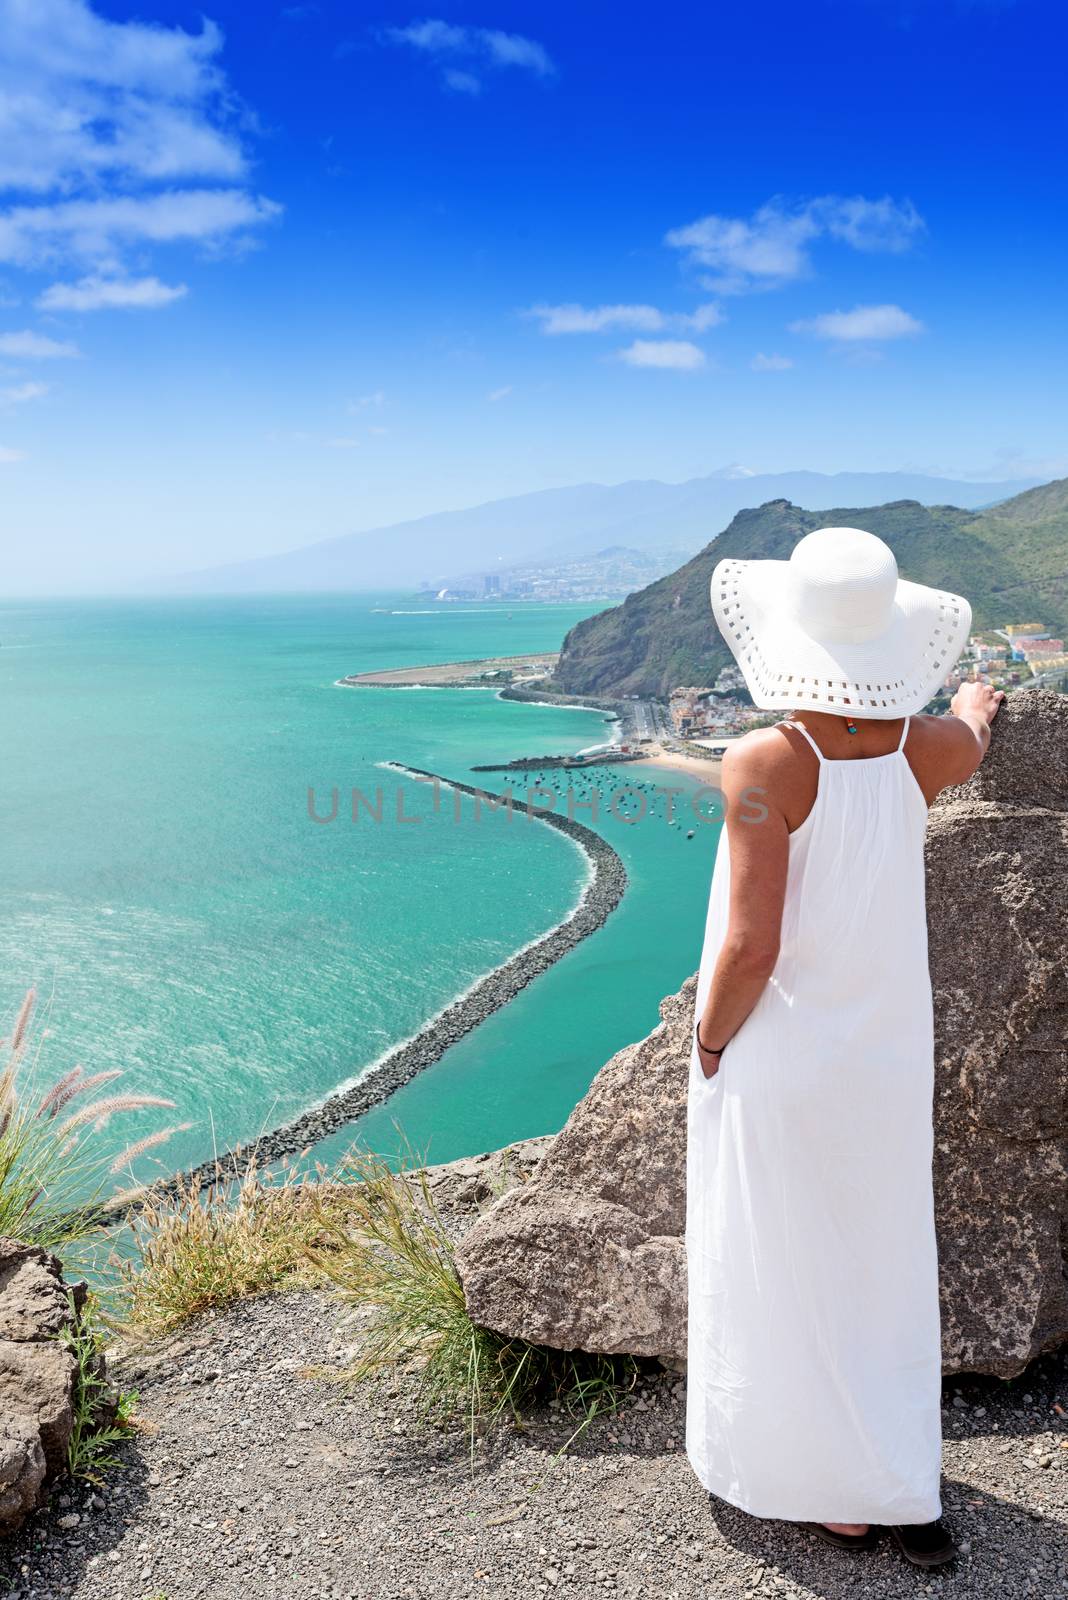 Lonely woman looking on scenic view at Tenerife, Teide volcano on background